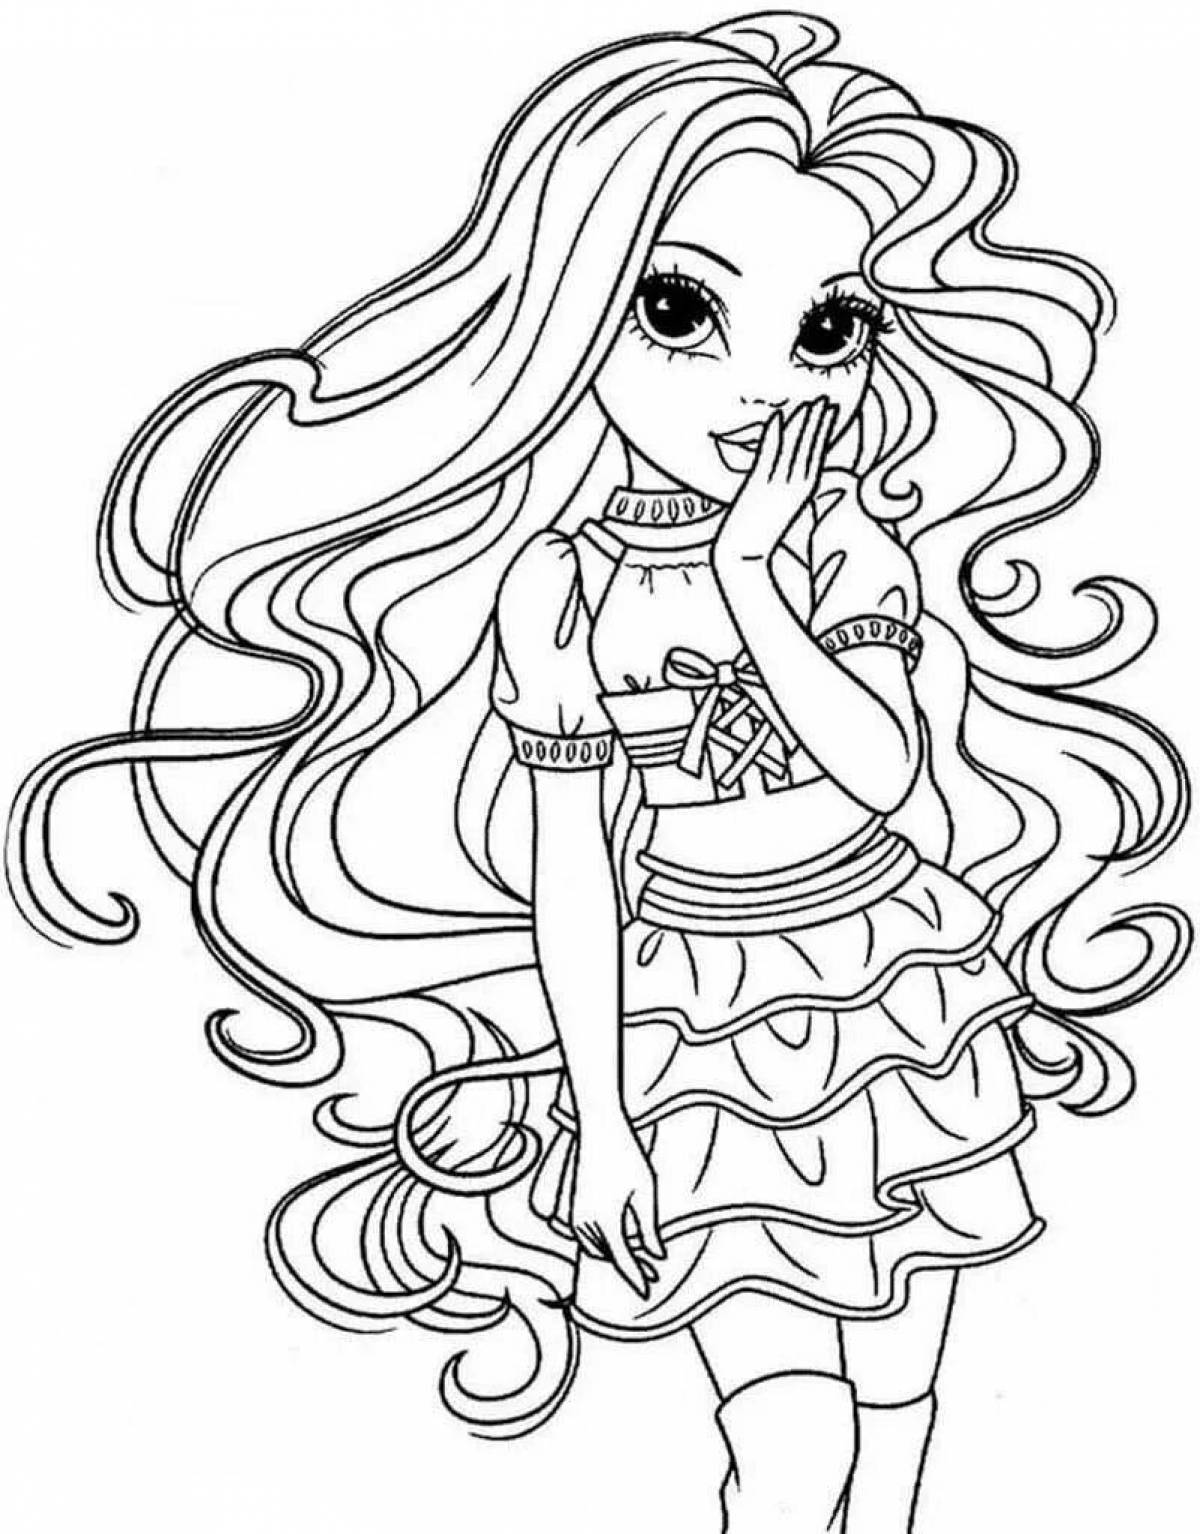 Fairytale coloring book for girls 10-12 years old